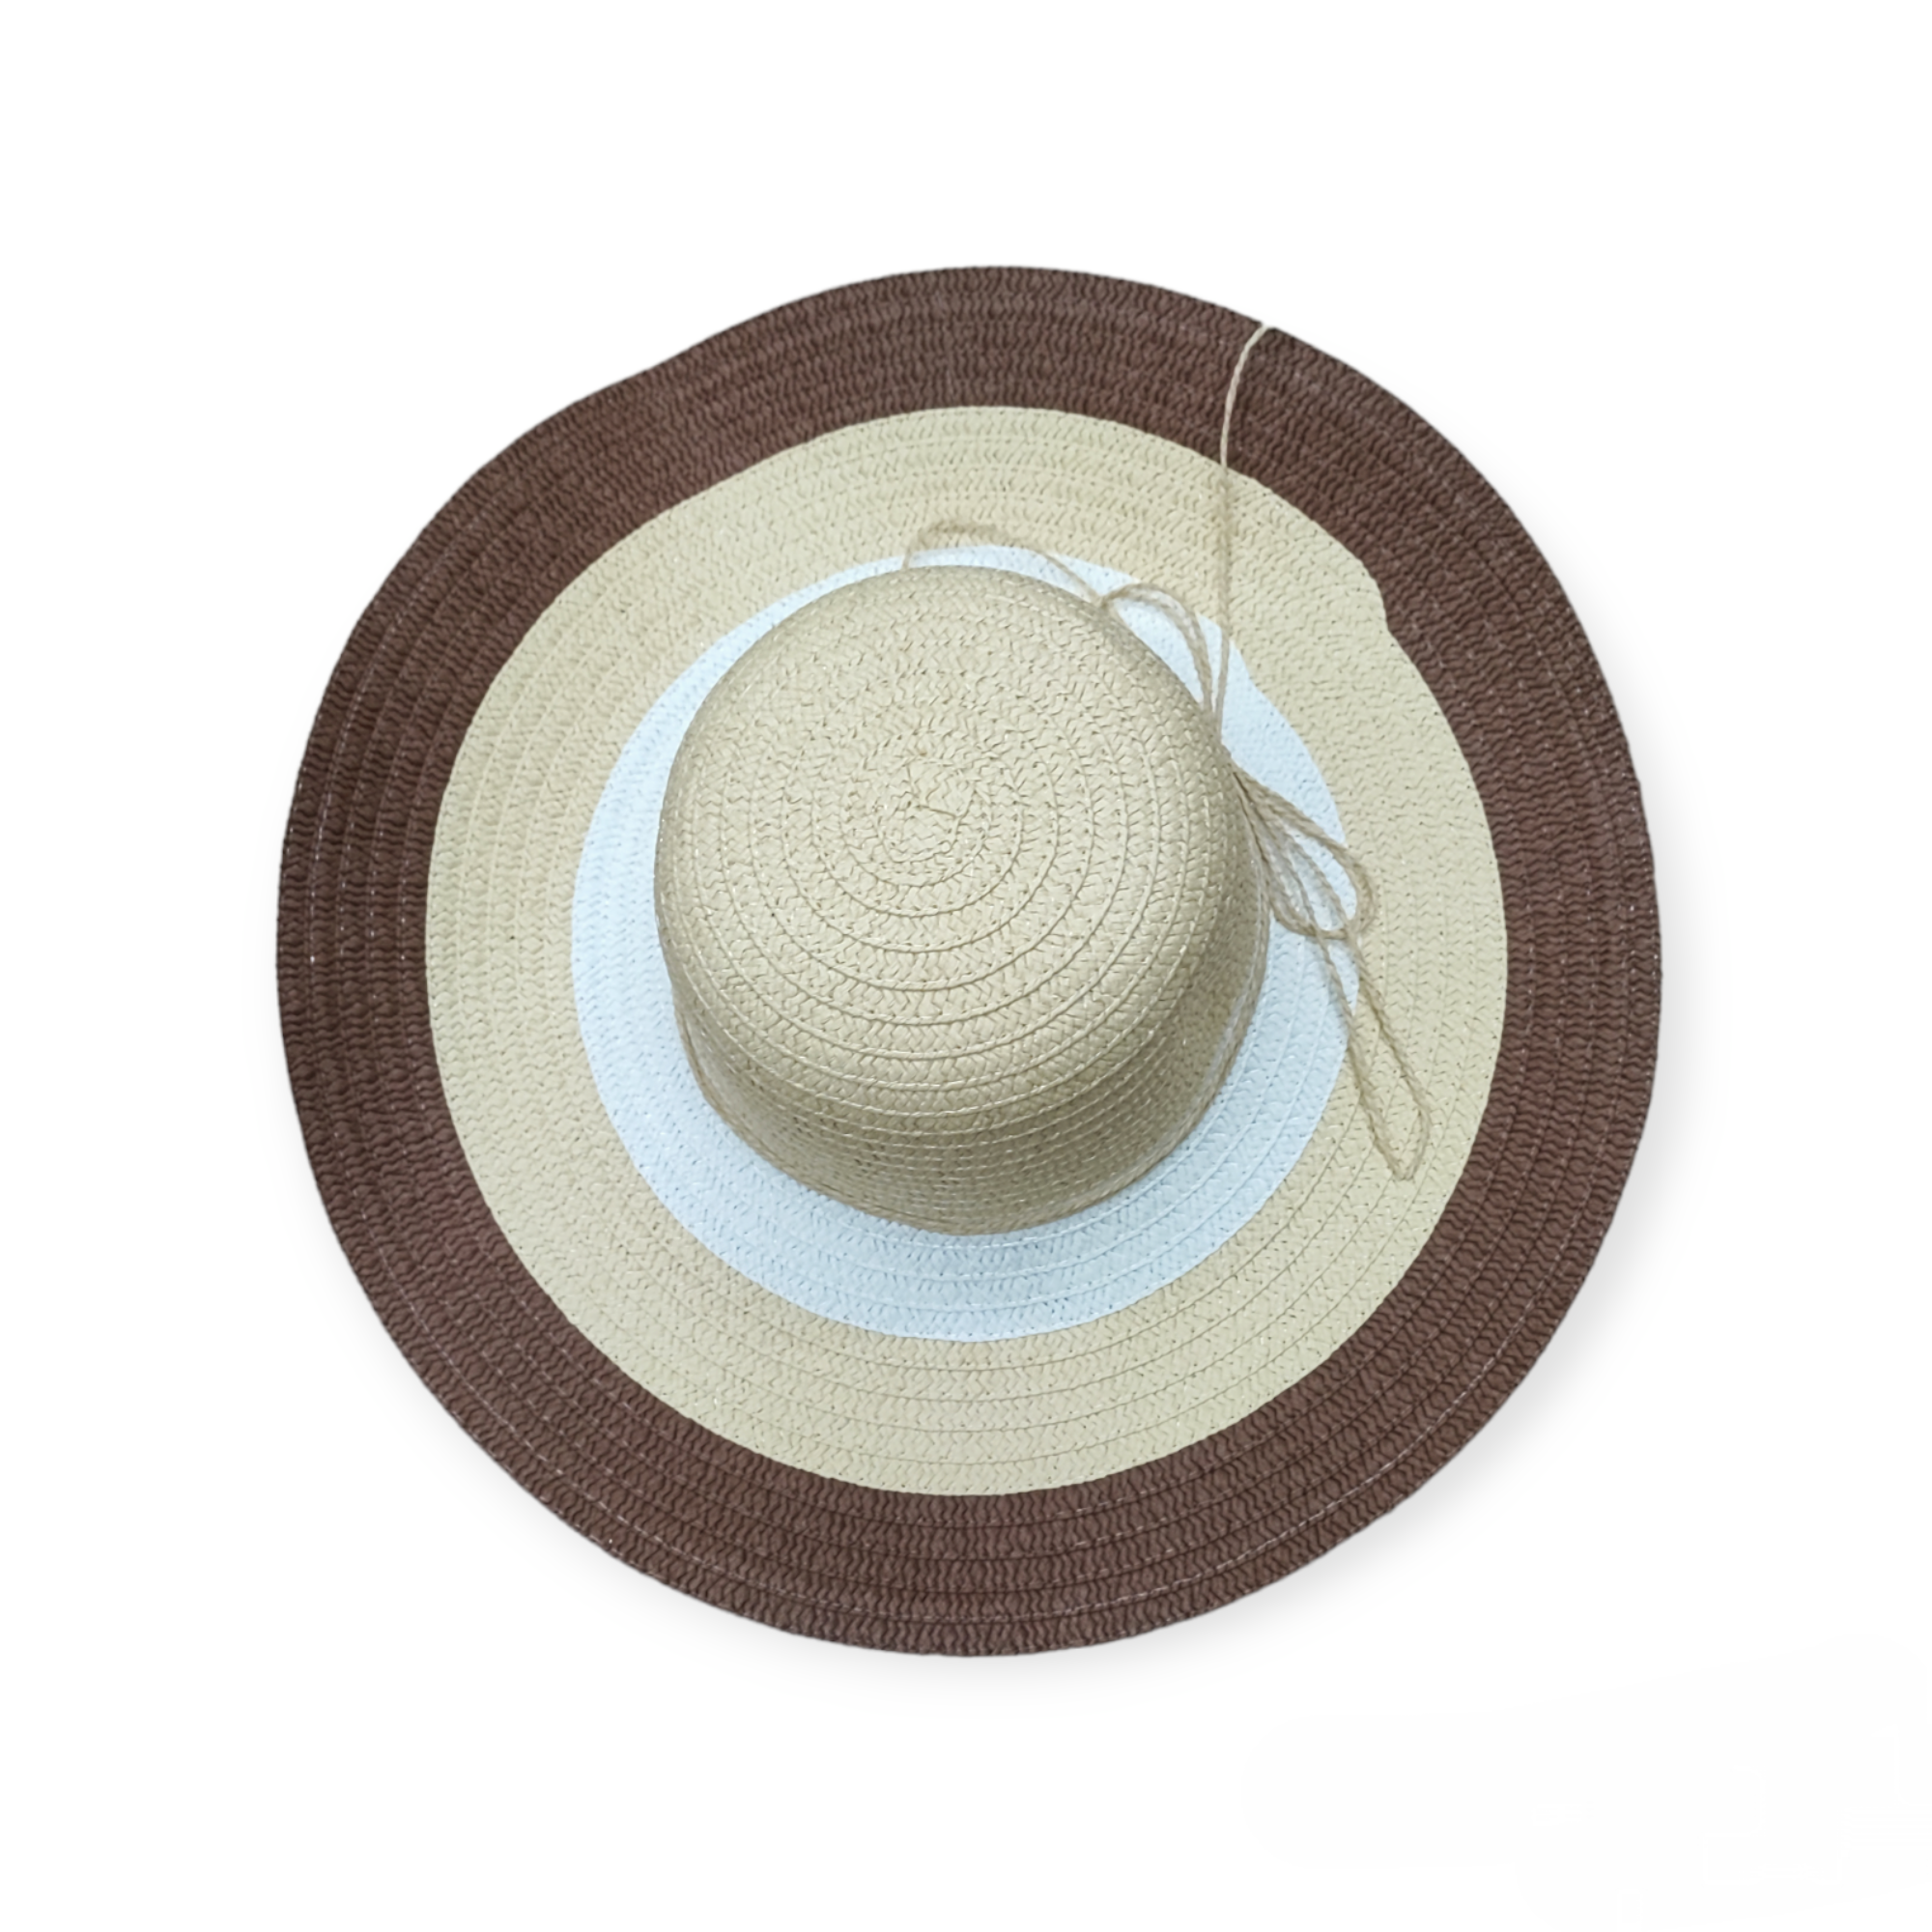 Colored floppy hat (x12)